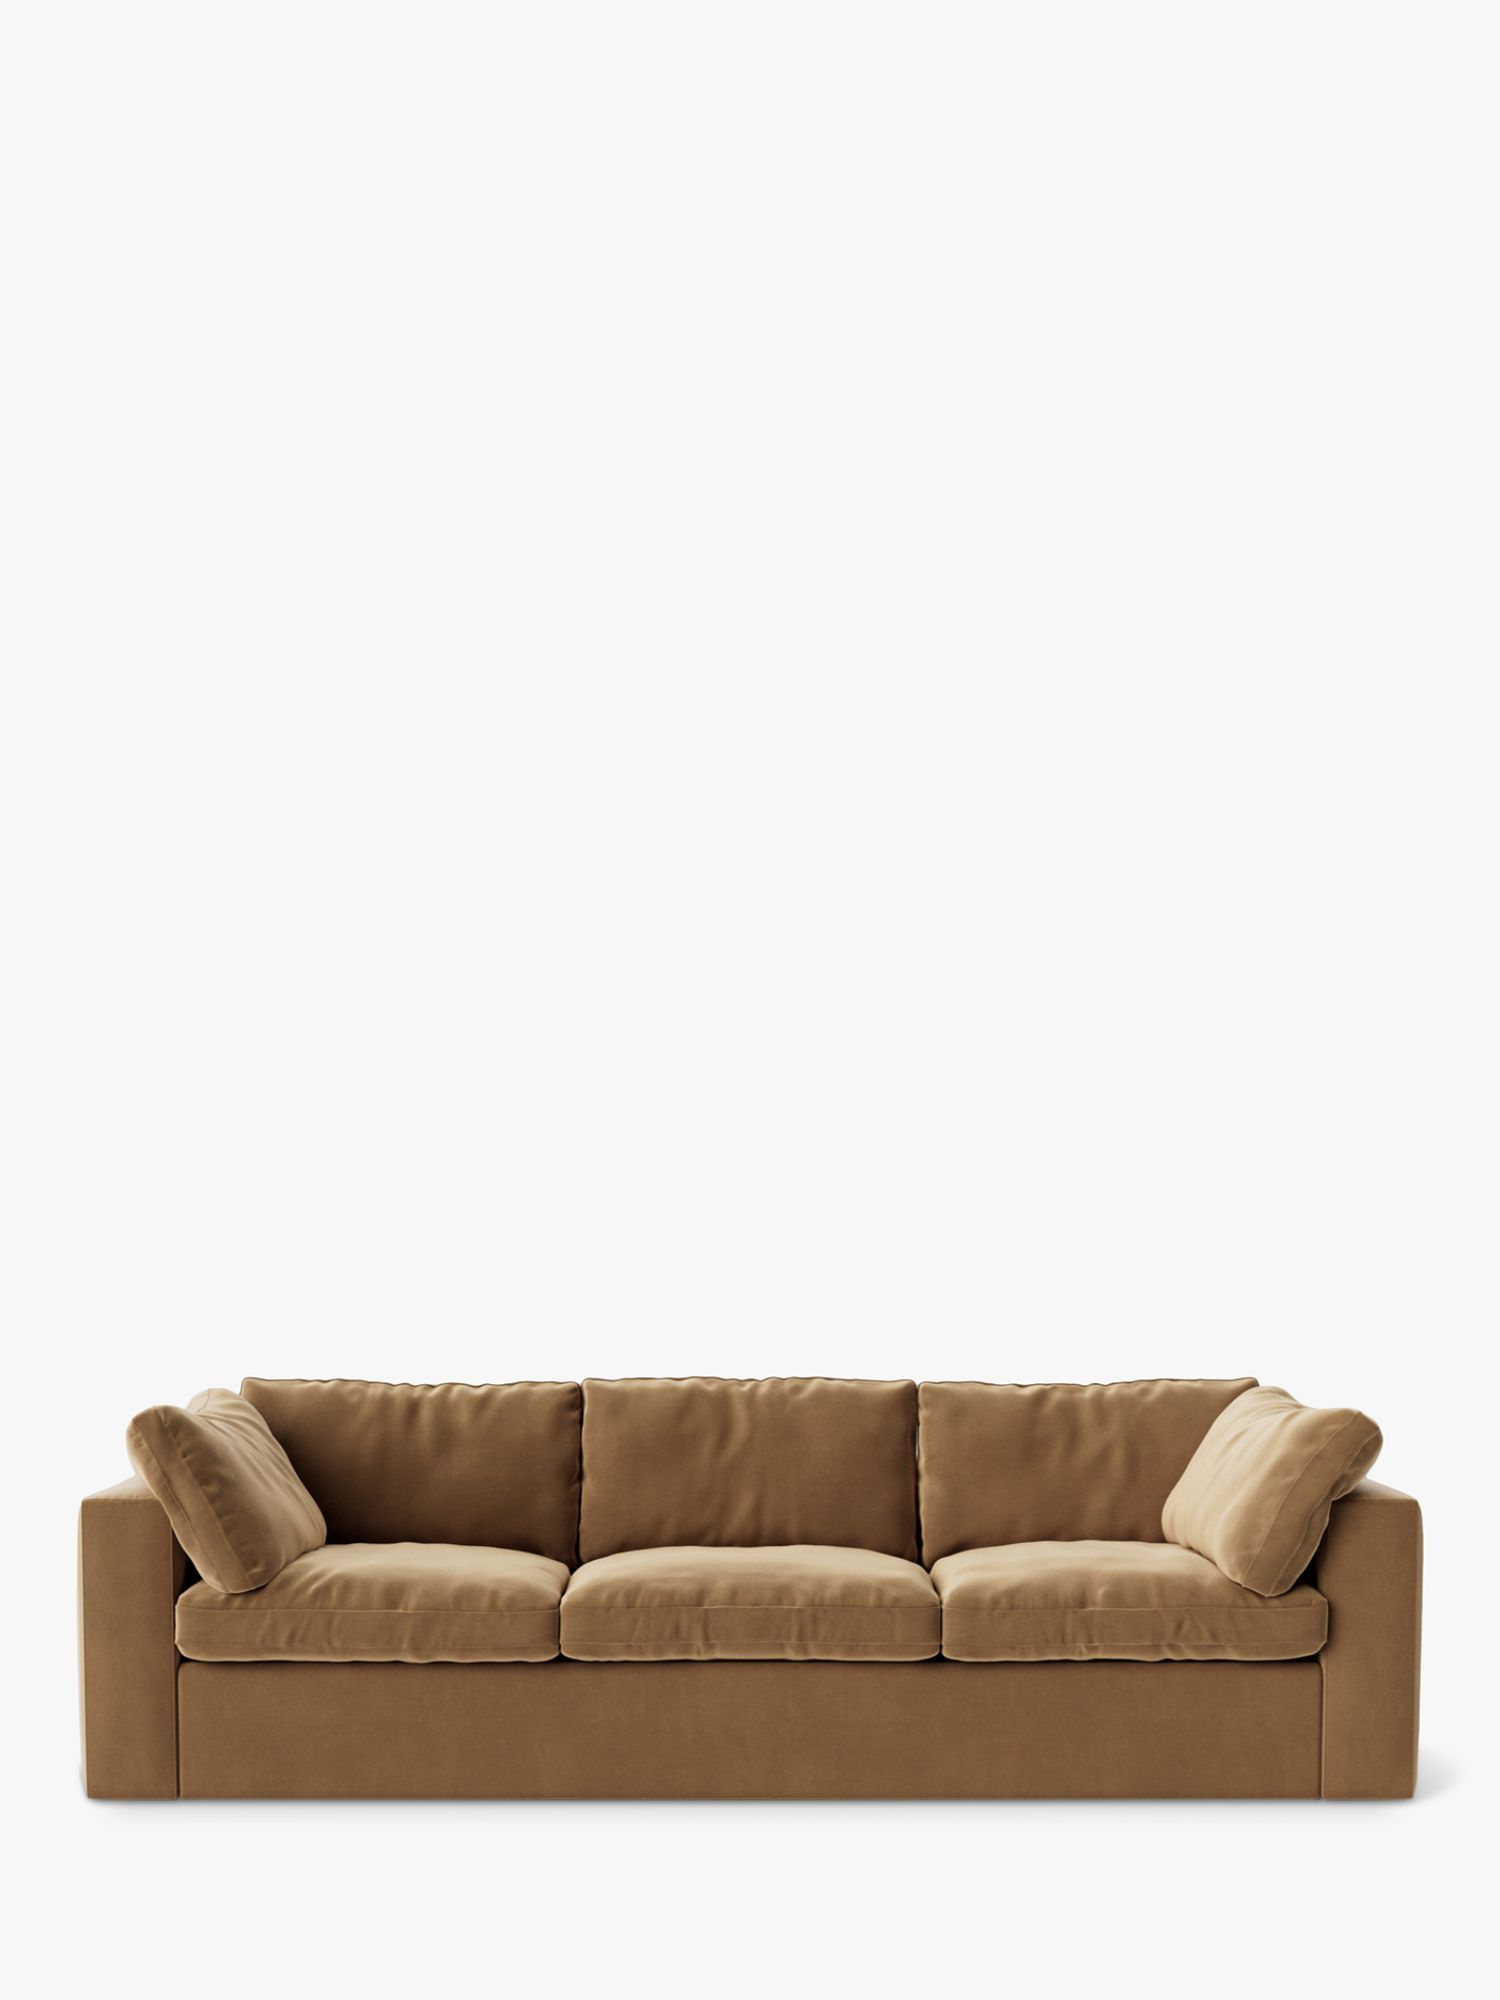 Seattle Range, Swoon Seattle Large 3 Seater Sofa, Easy Velvet Biscuit